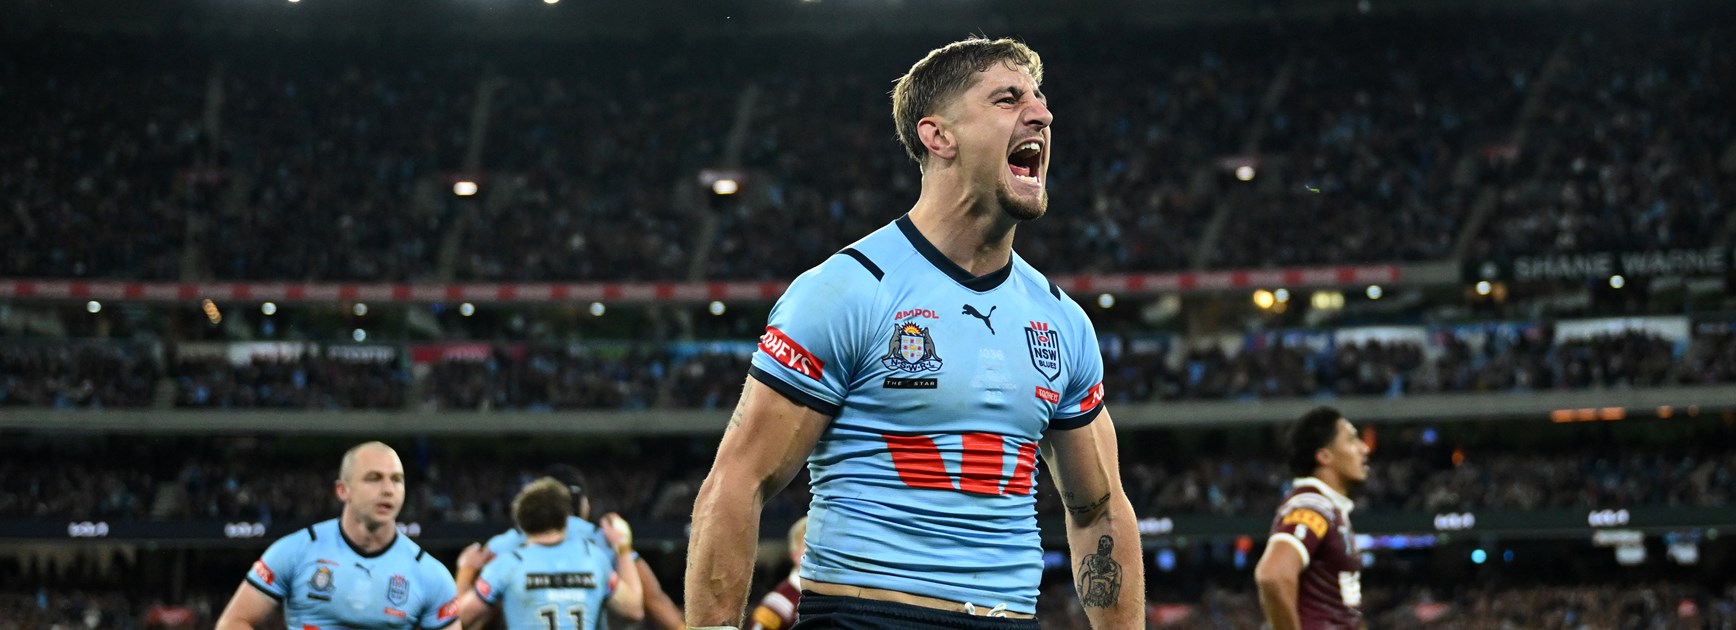 From park footy to Origin arena: Why Zac is set to shine on biggest stage